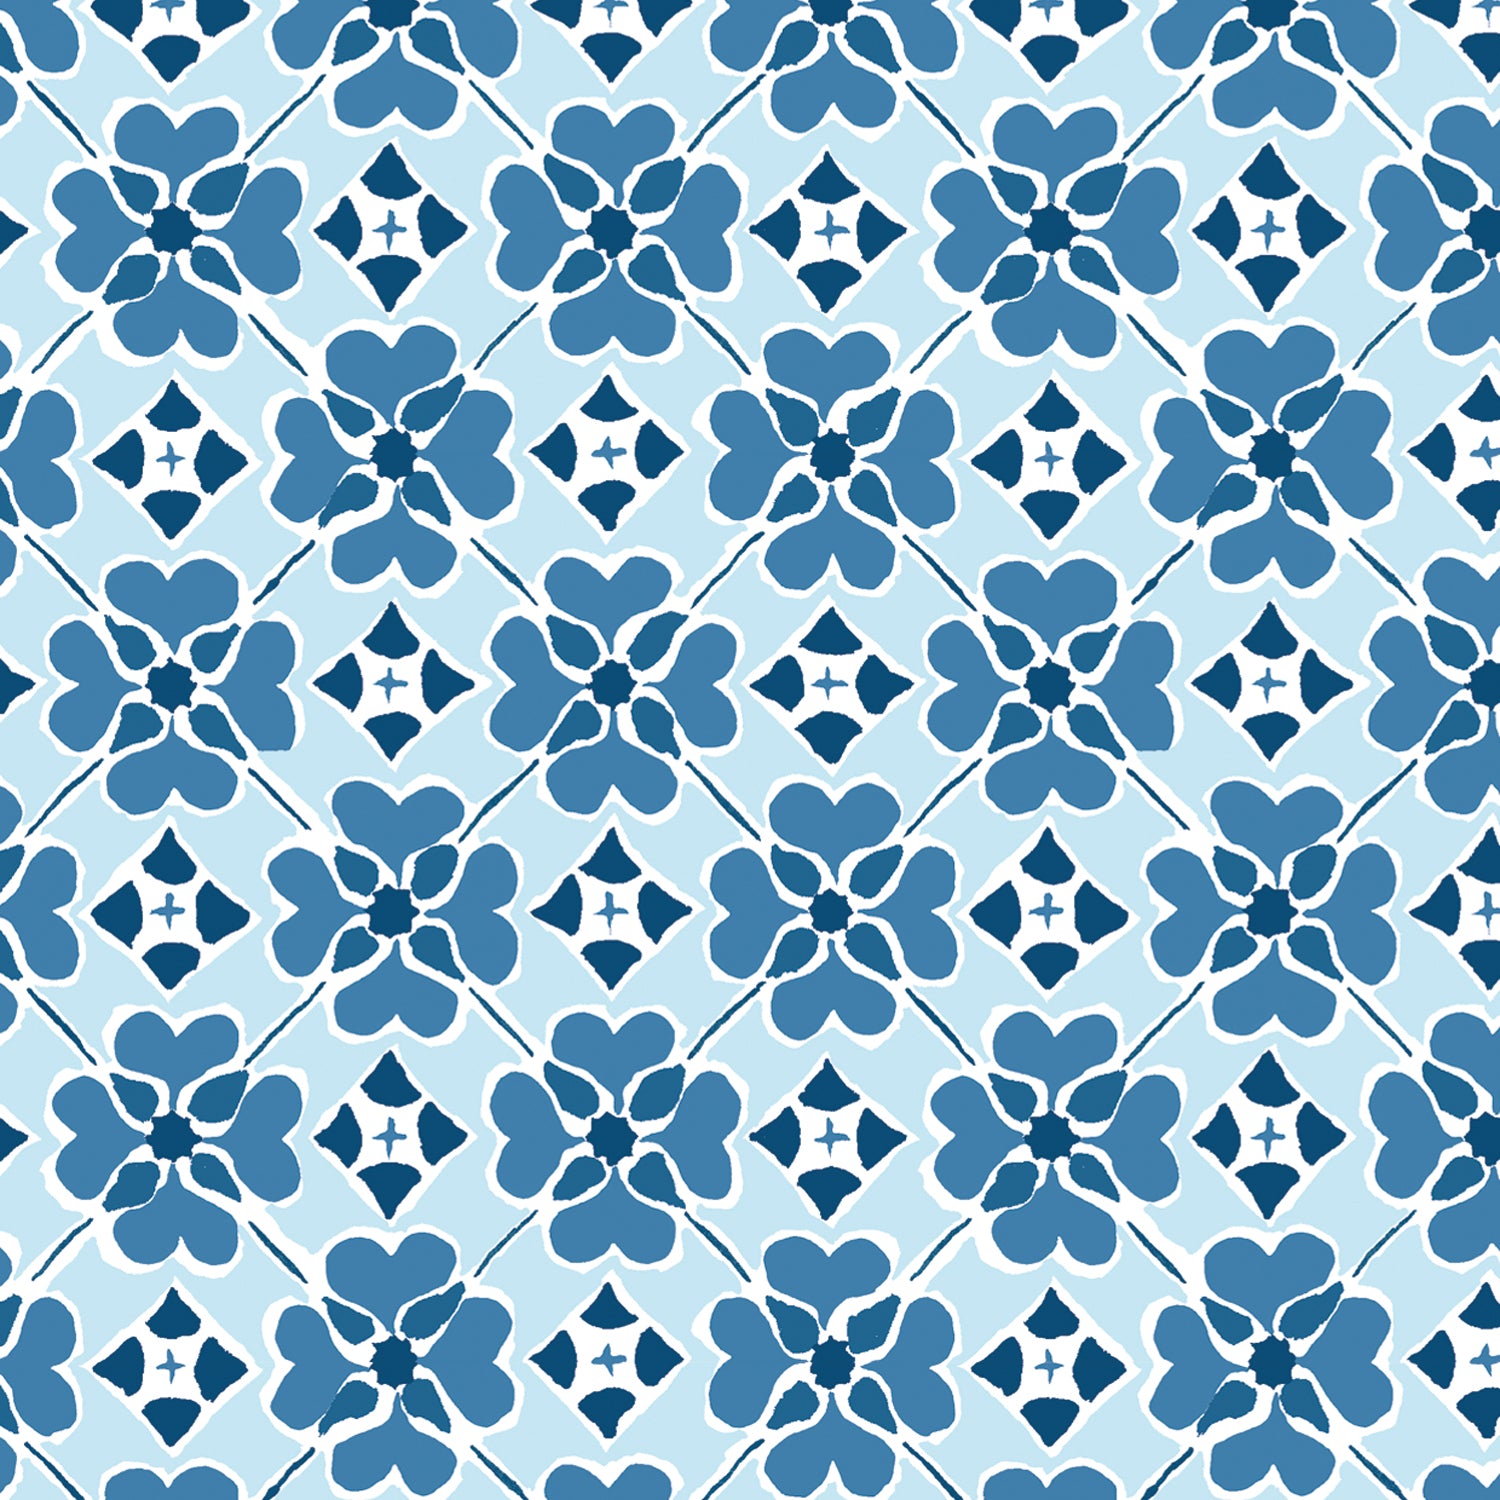 Detail of wallpaper in a floral lattice print in blue, navy and white.